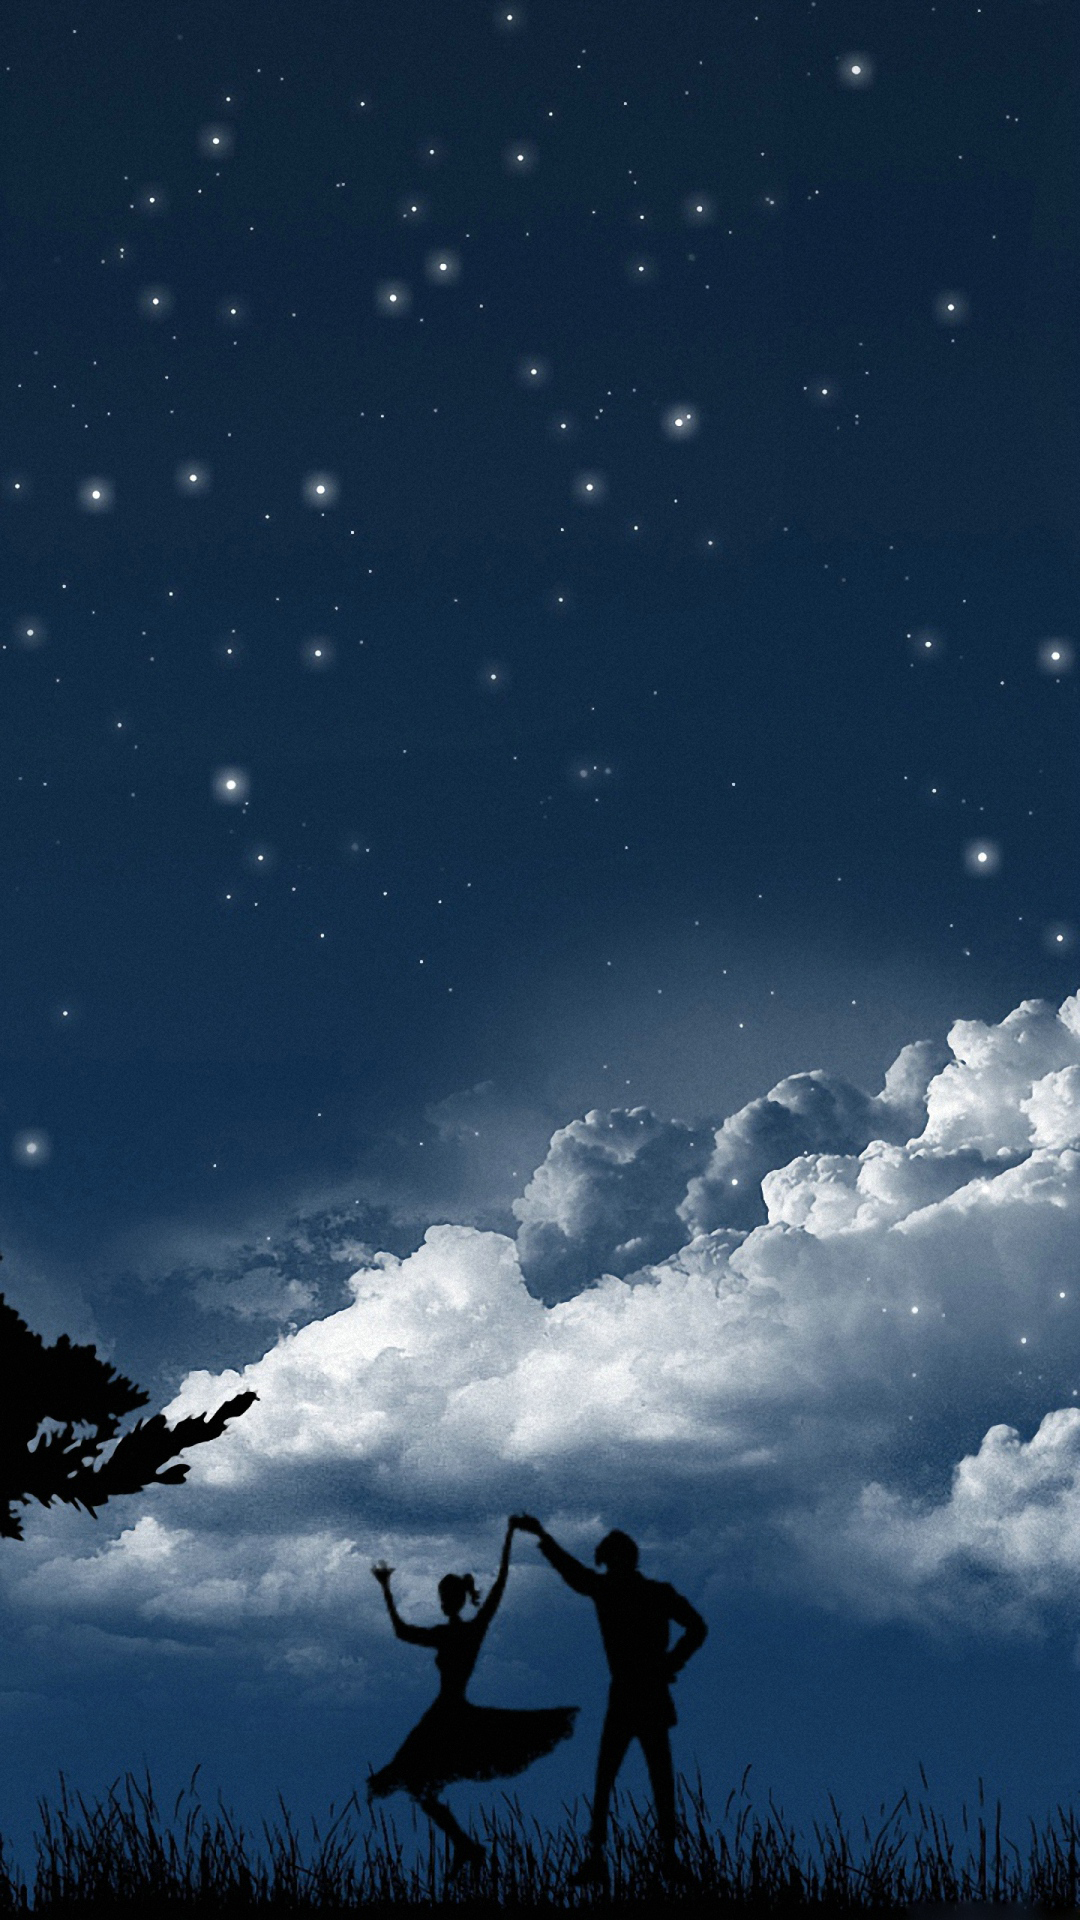 iphone wallpapers hd free download,sky,cloud,atmosphere,photography,night